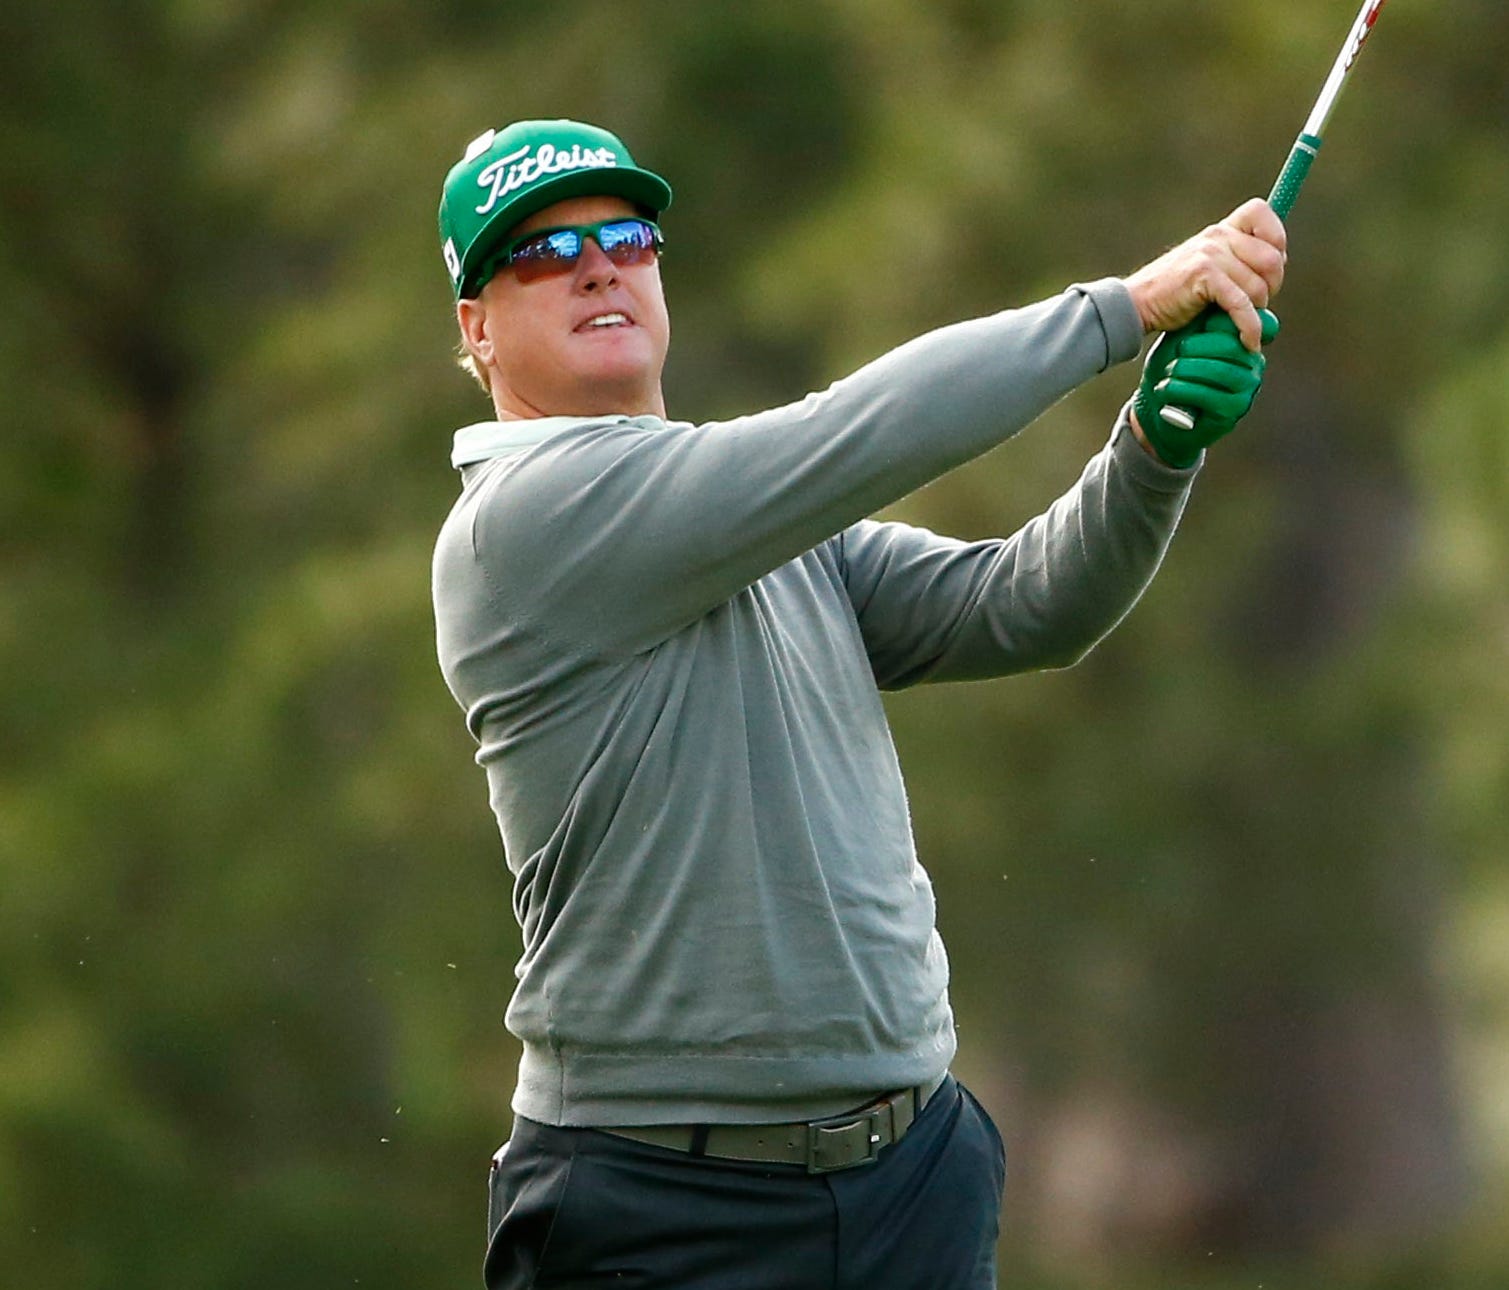 Charley Hoffman leads the Masters by four shots after the first round.